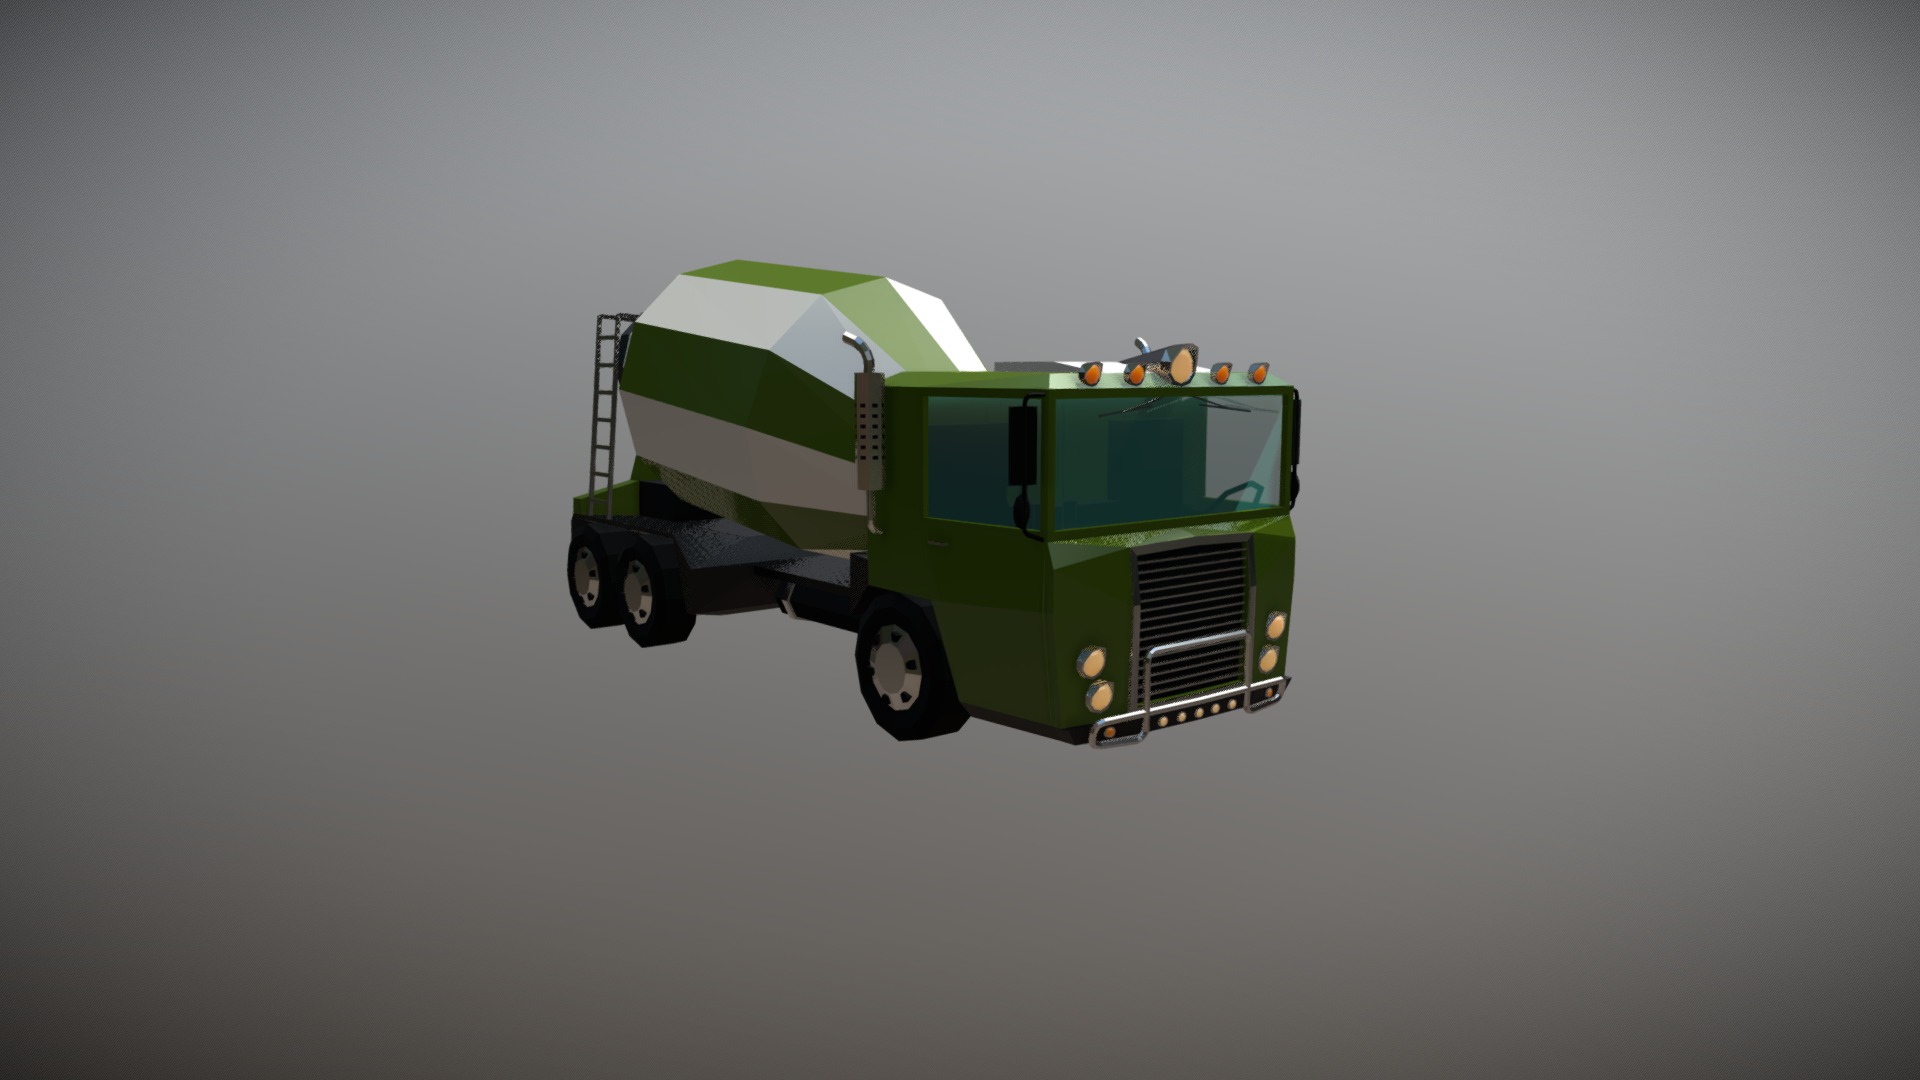 3D model Low Poly Concrete Mixer Truck - This is a 3D model of the Low Poly Concrete Mixer Truck. The 3D model is about a toy truck with a green roof.